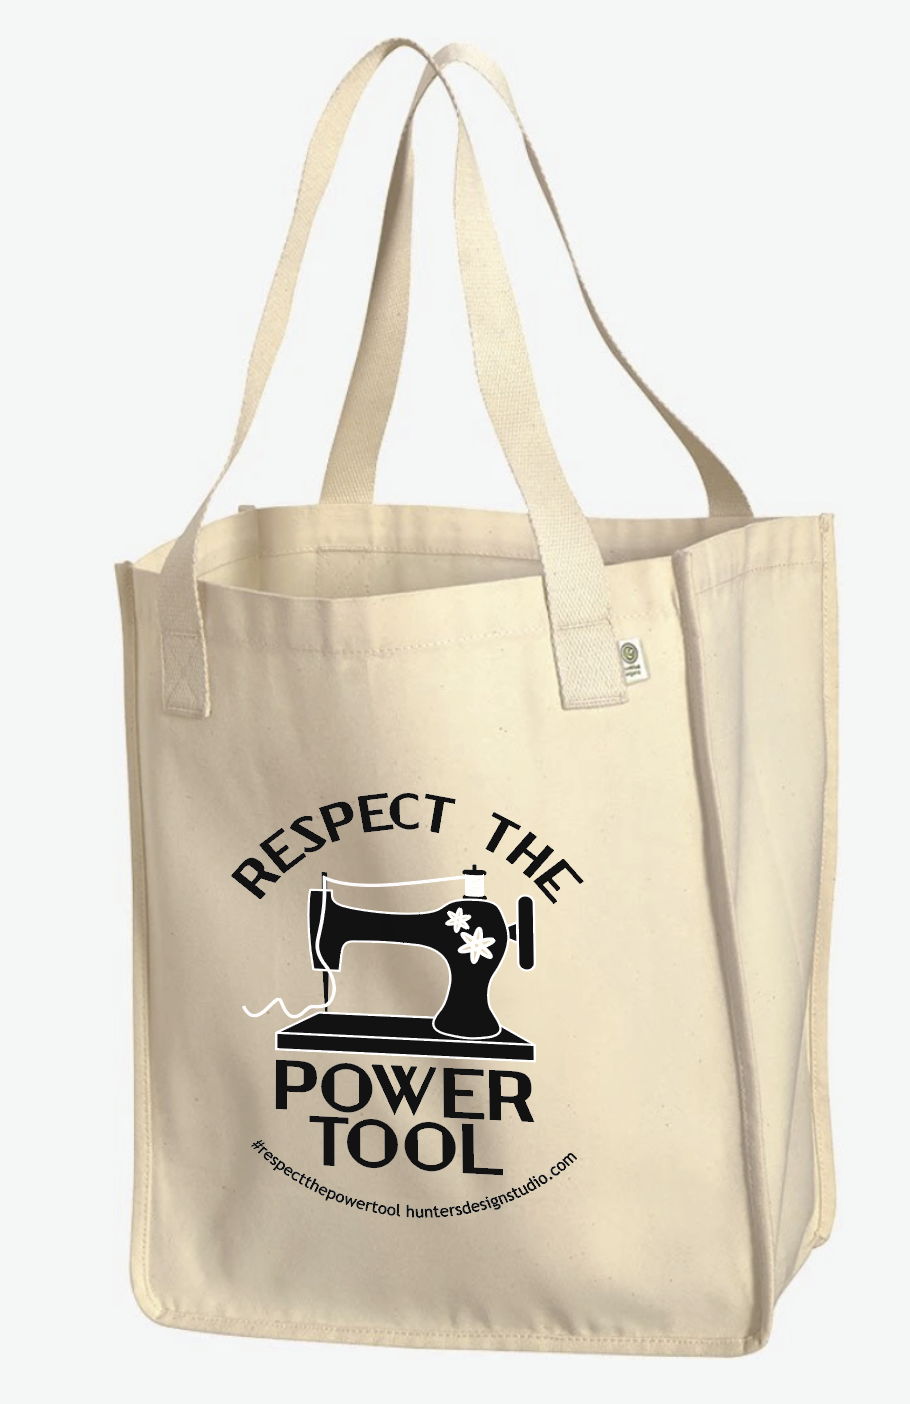 Respect The Power Tool - Organic Market Tote